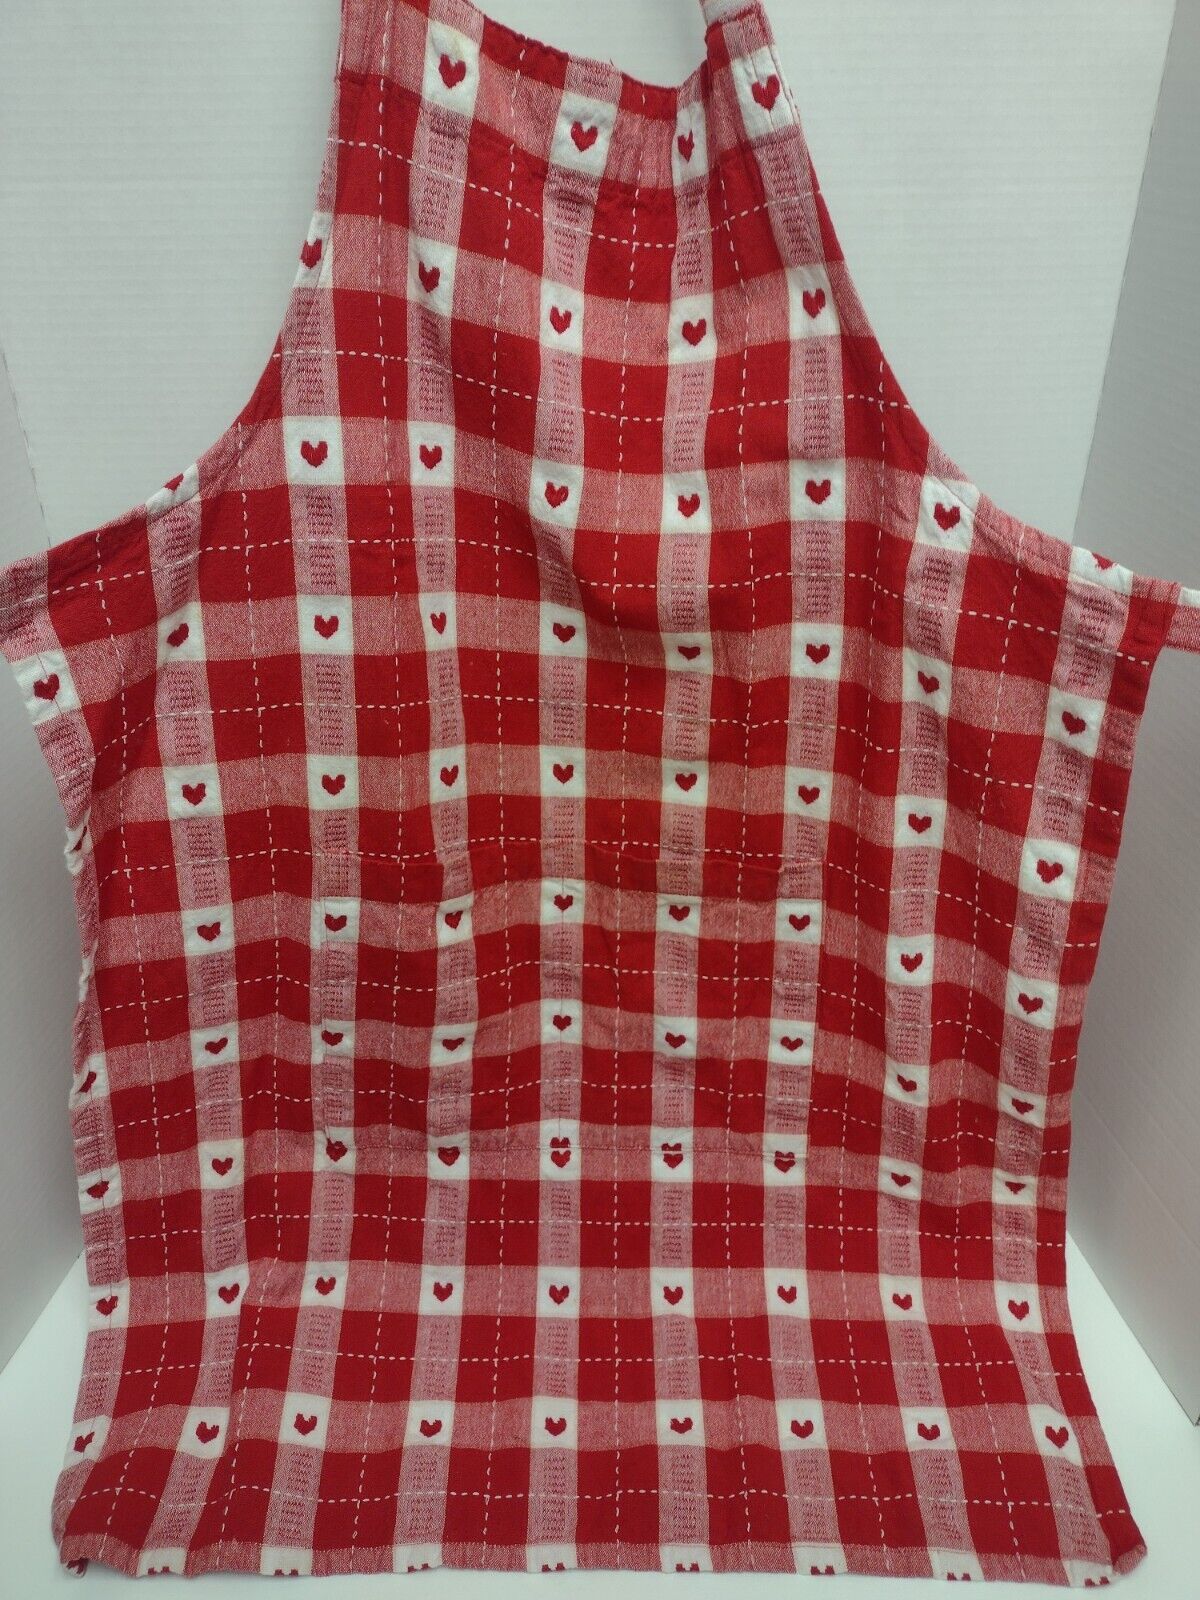 Vintage Bakers Apron MCM Red Checkered Hearts One Stitch 50s-60s Look Adjustable